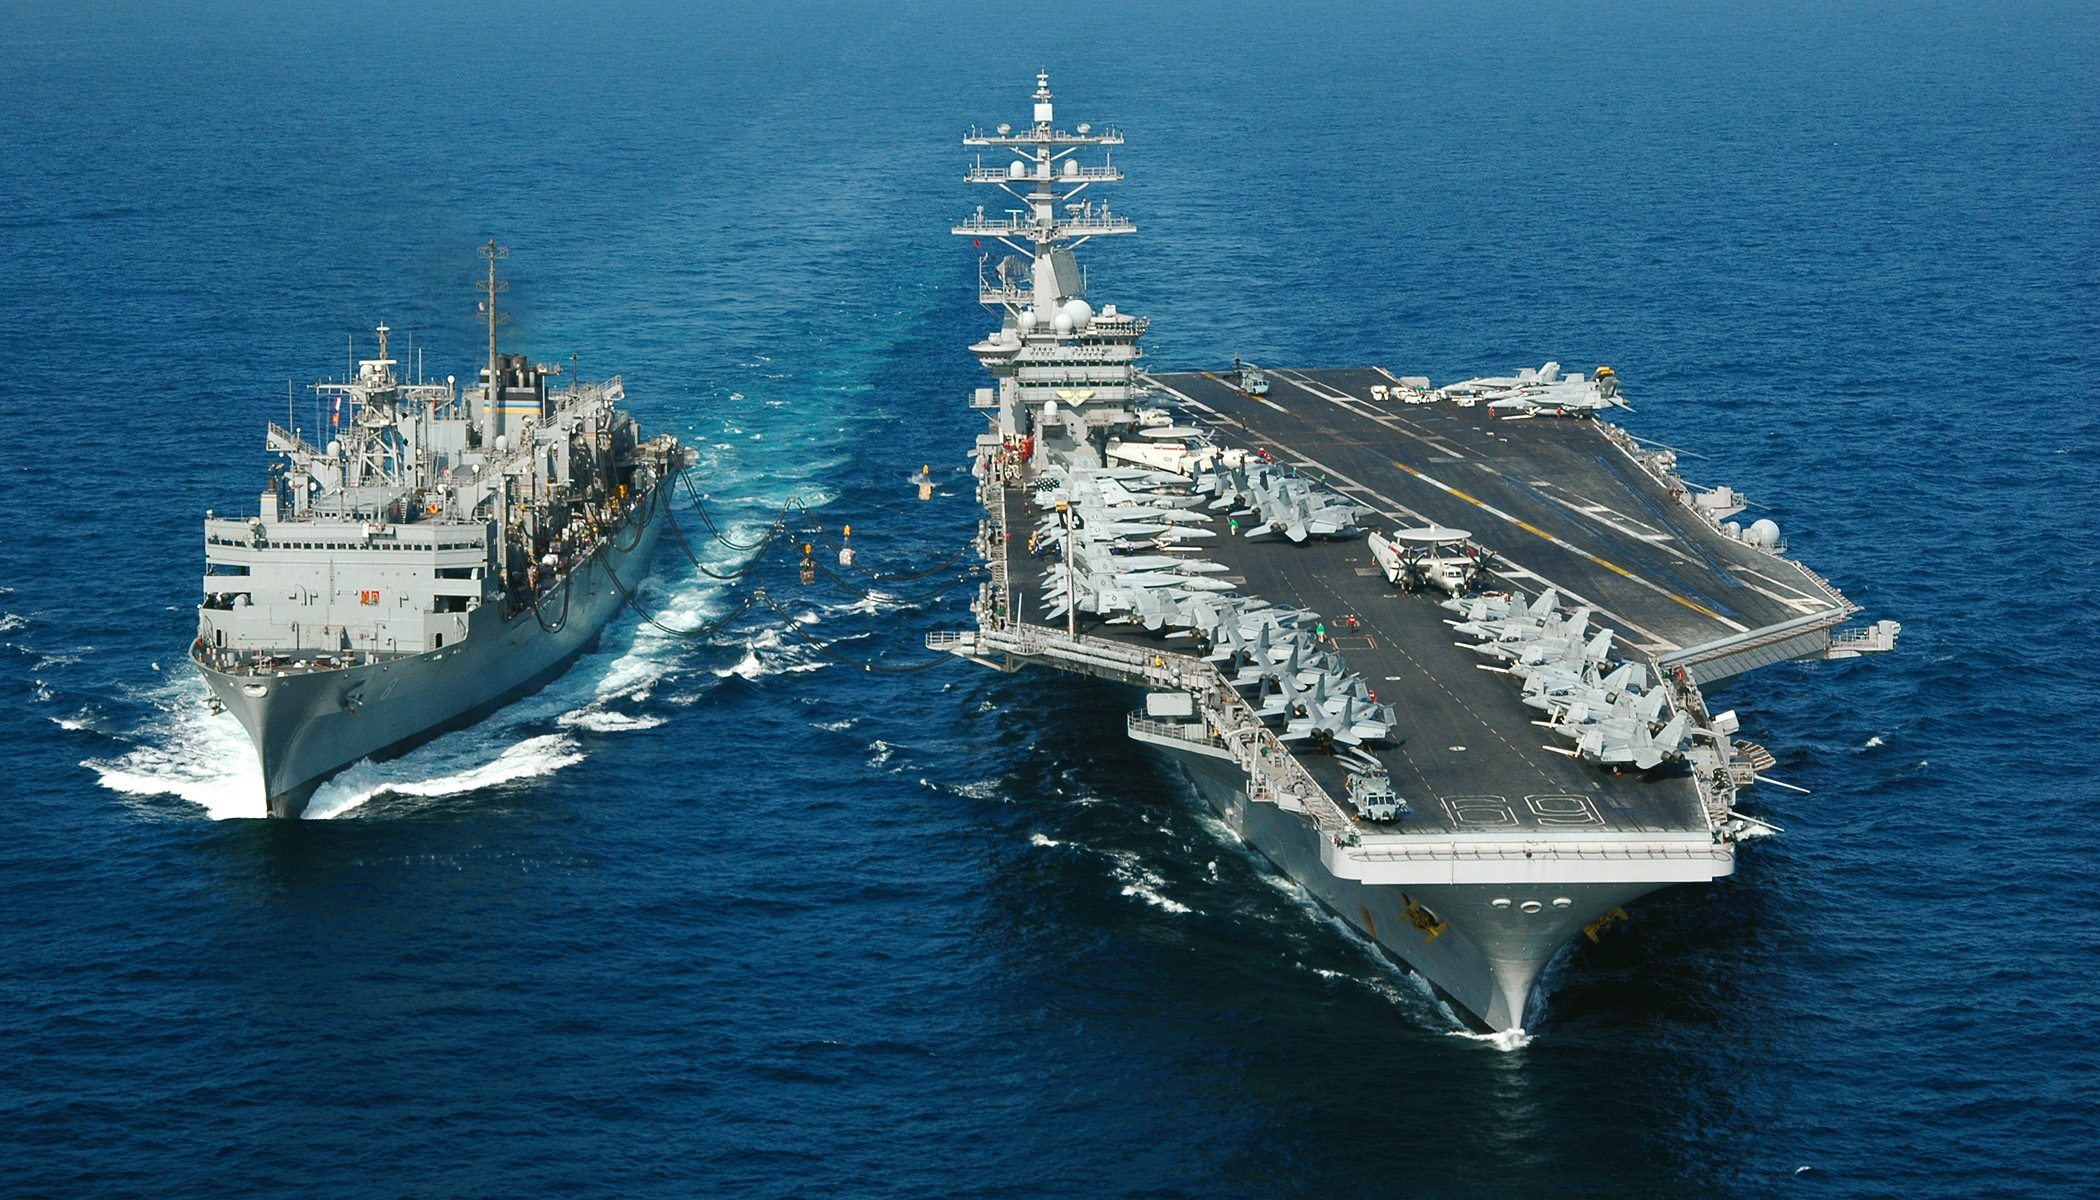 The U.S. has 19 aircraft carriers, compared to the rest of the world's 12 aircraft carriers combined.